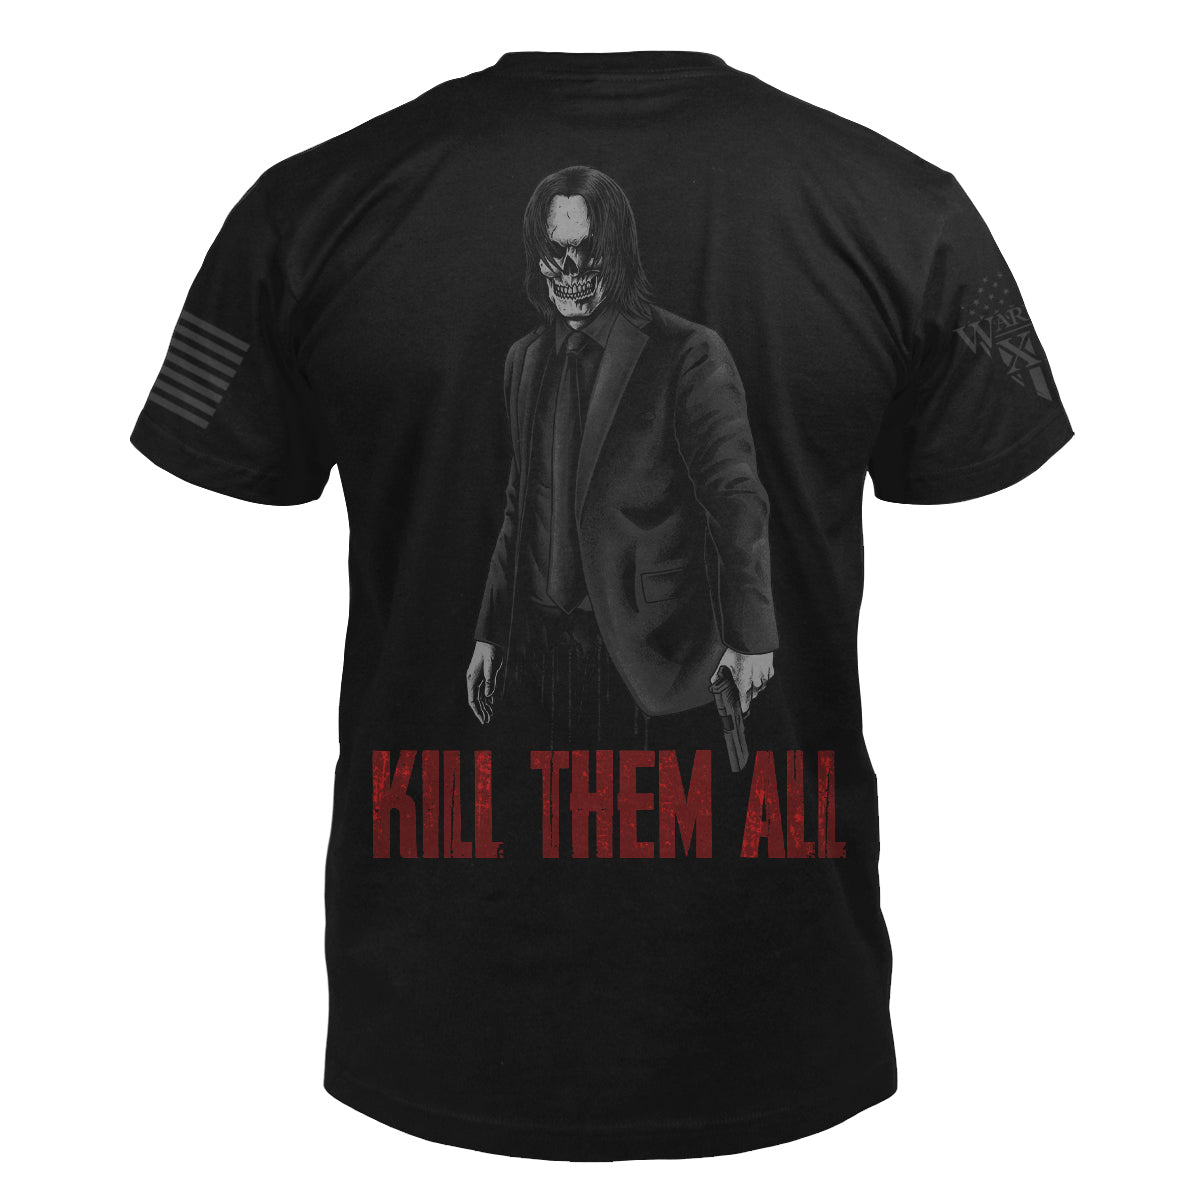 A black t-shirt with the image of a skeletal man in a suit holding a pistol with the words "Kill them All" on the back.